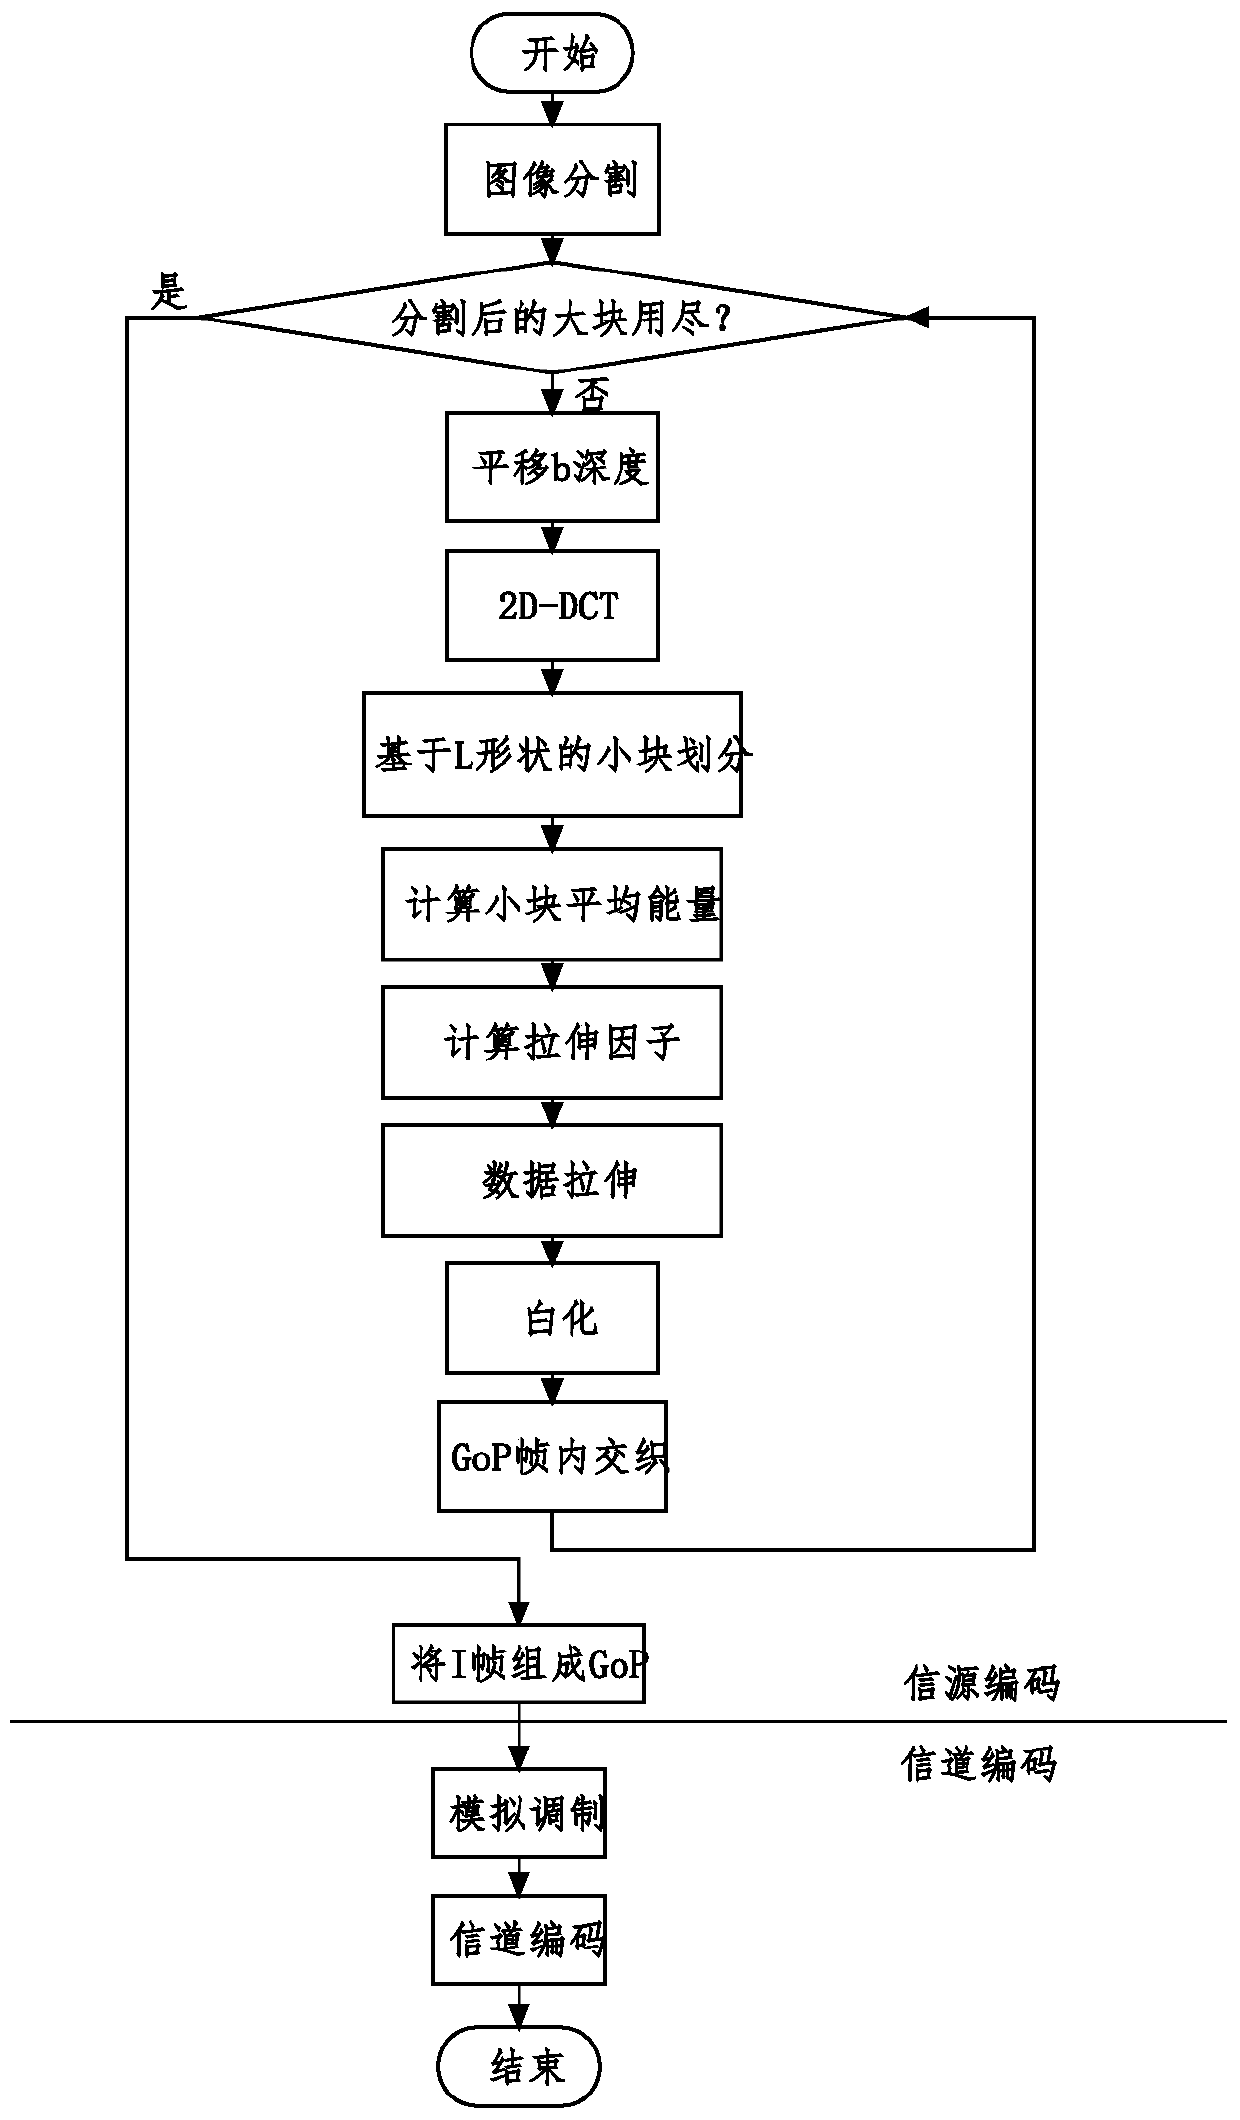 Fully Linear Multimedia Multicast Method Without Error Correction Protection